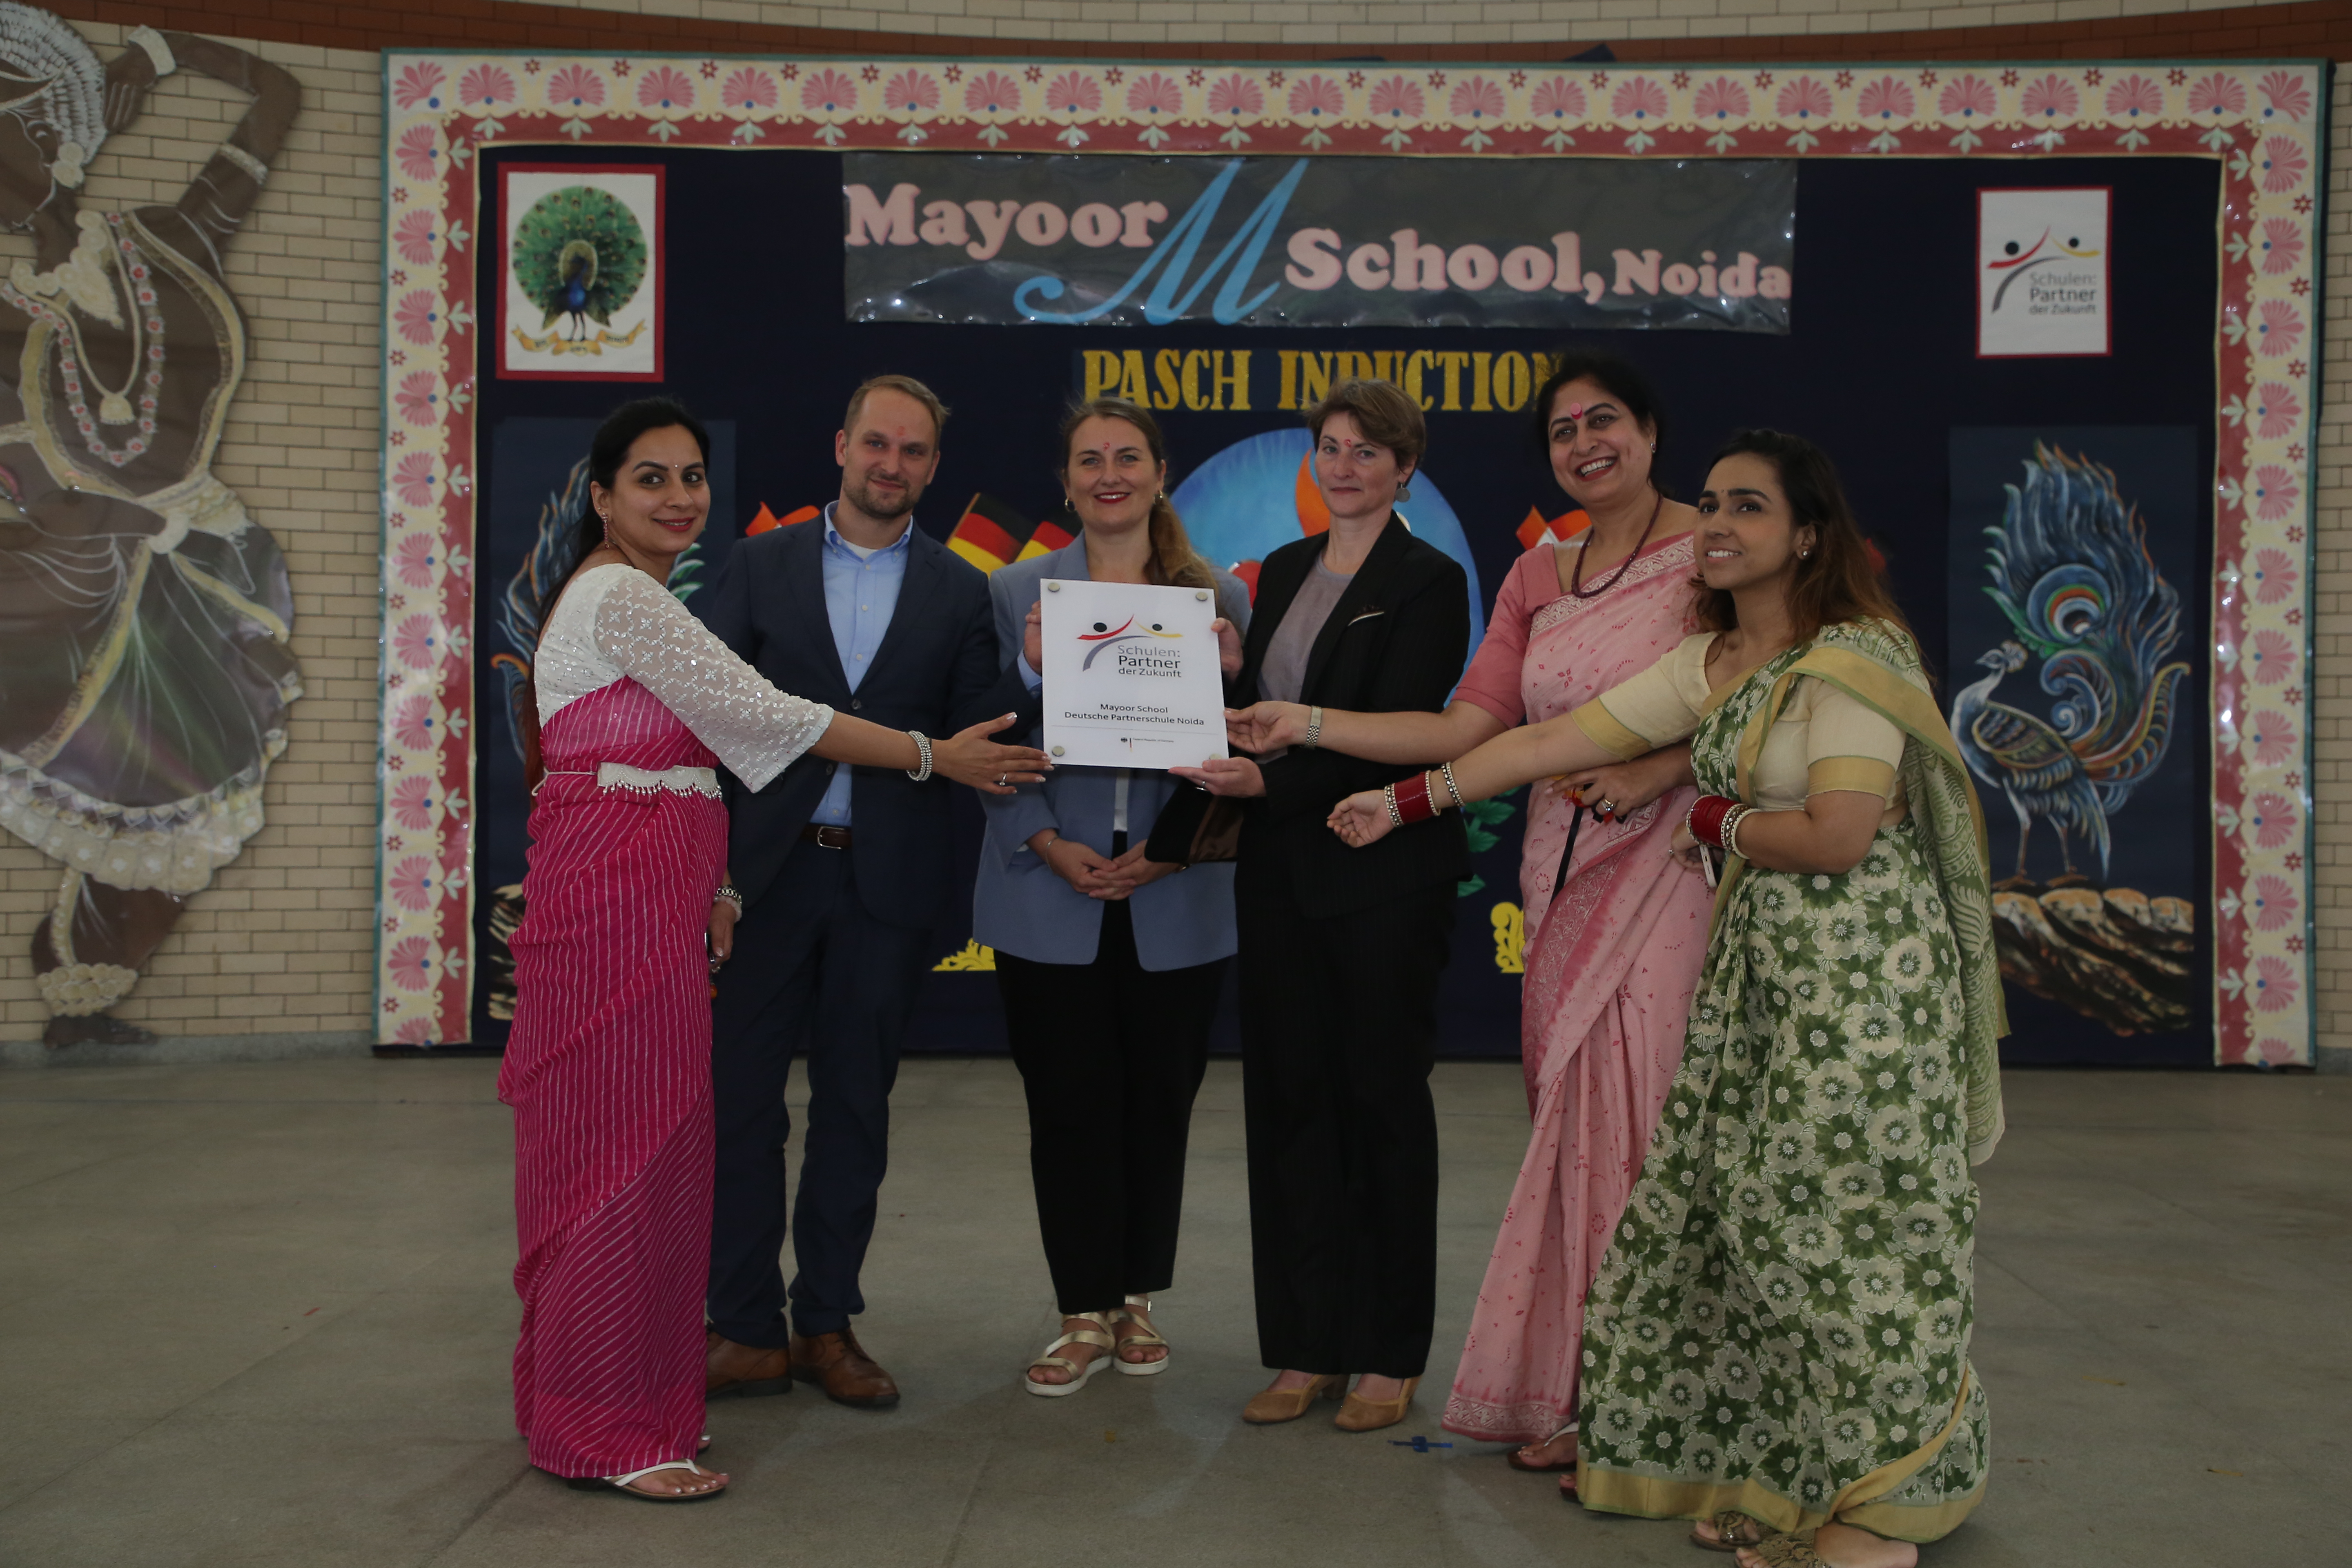 Mayoor wins recognition as PASCH school